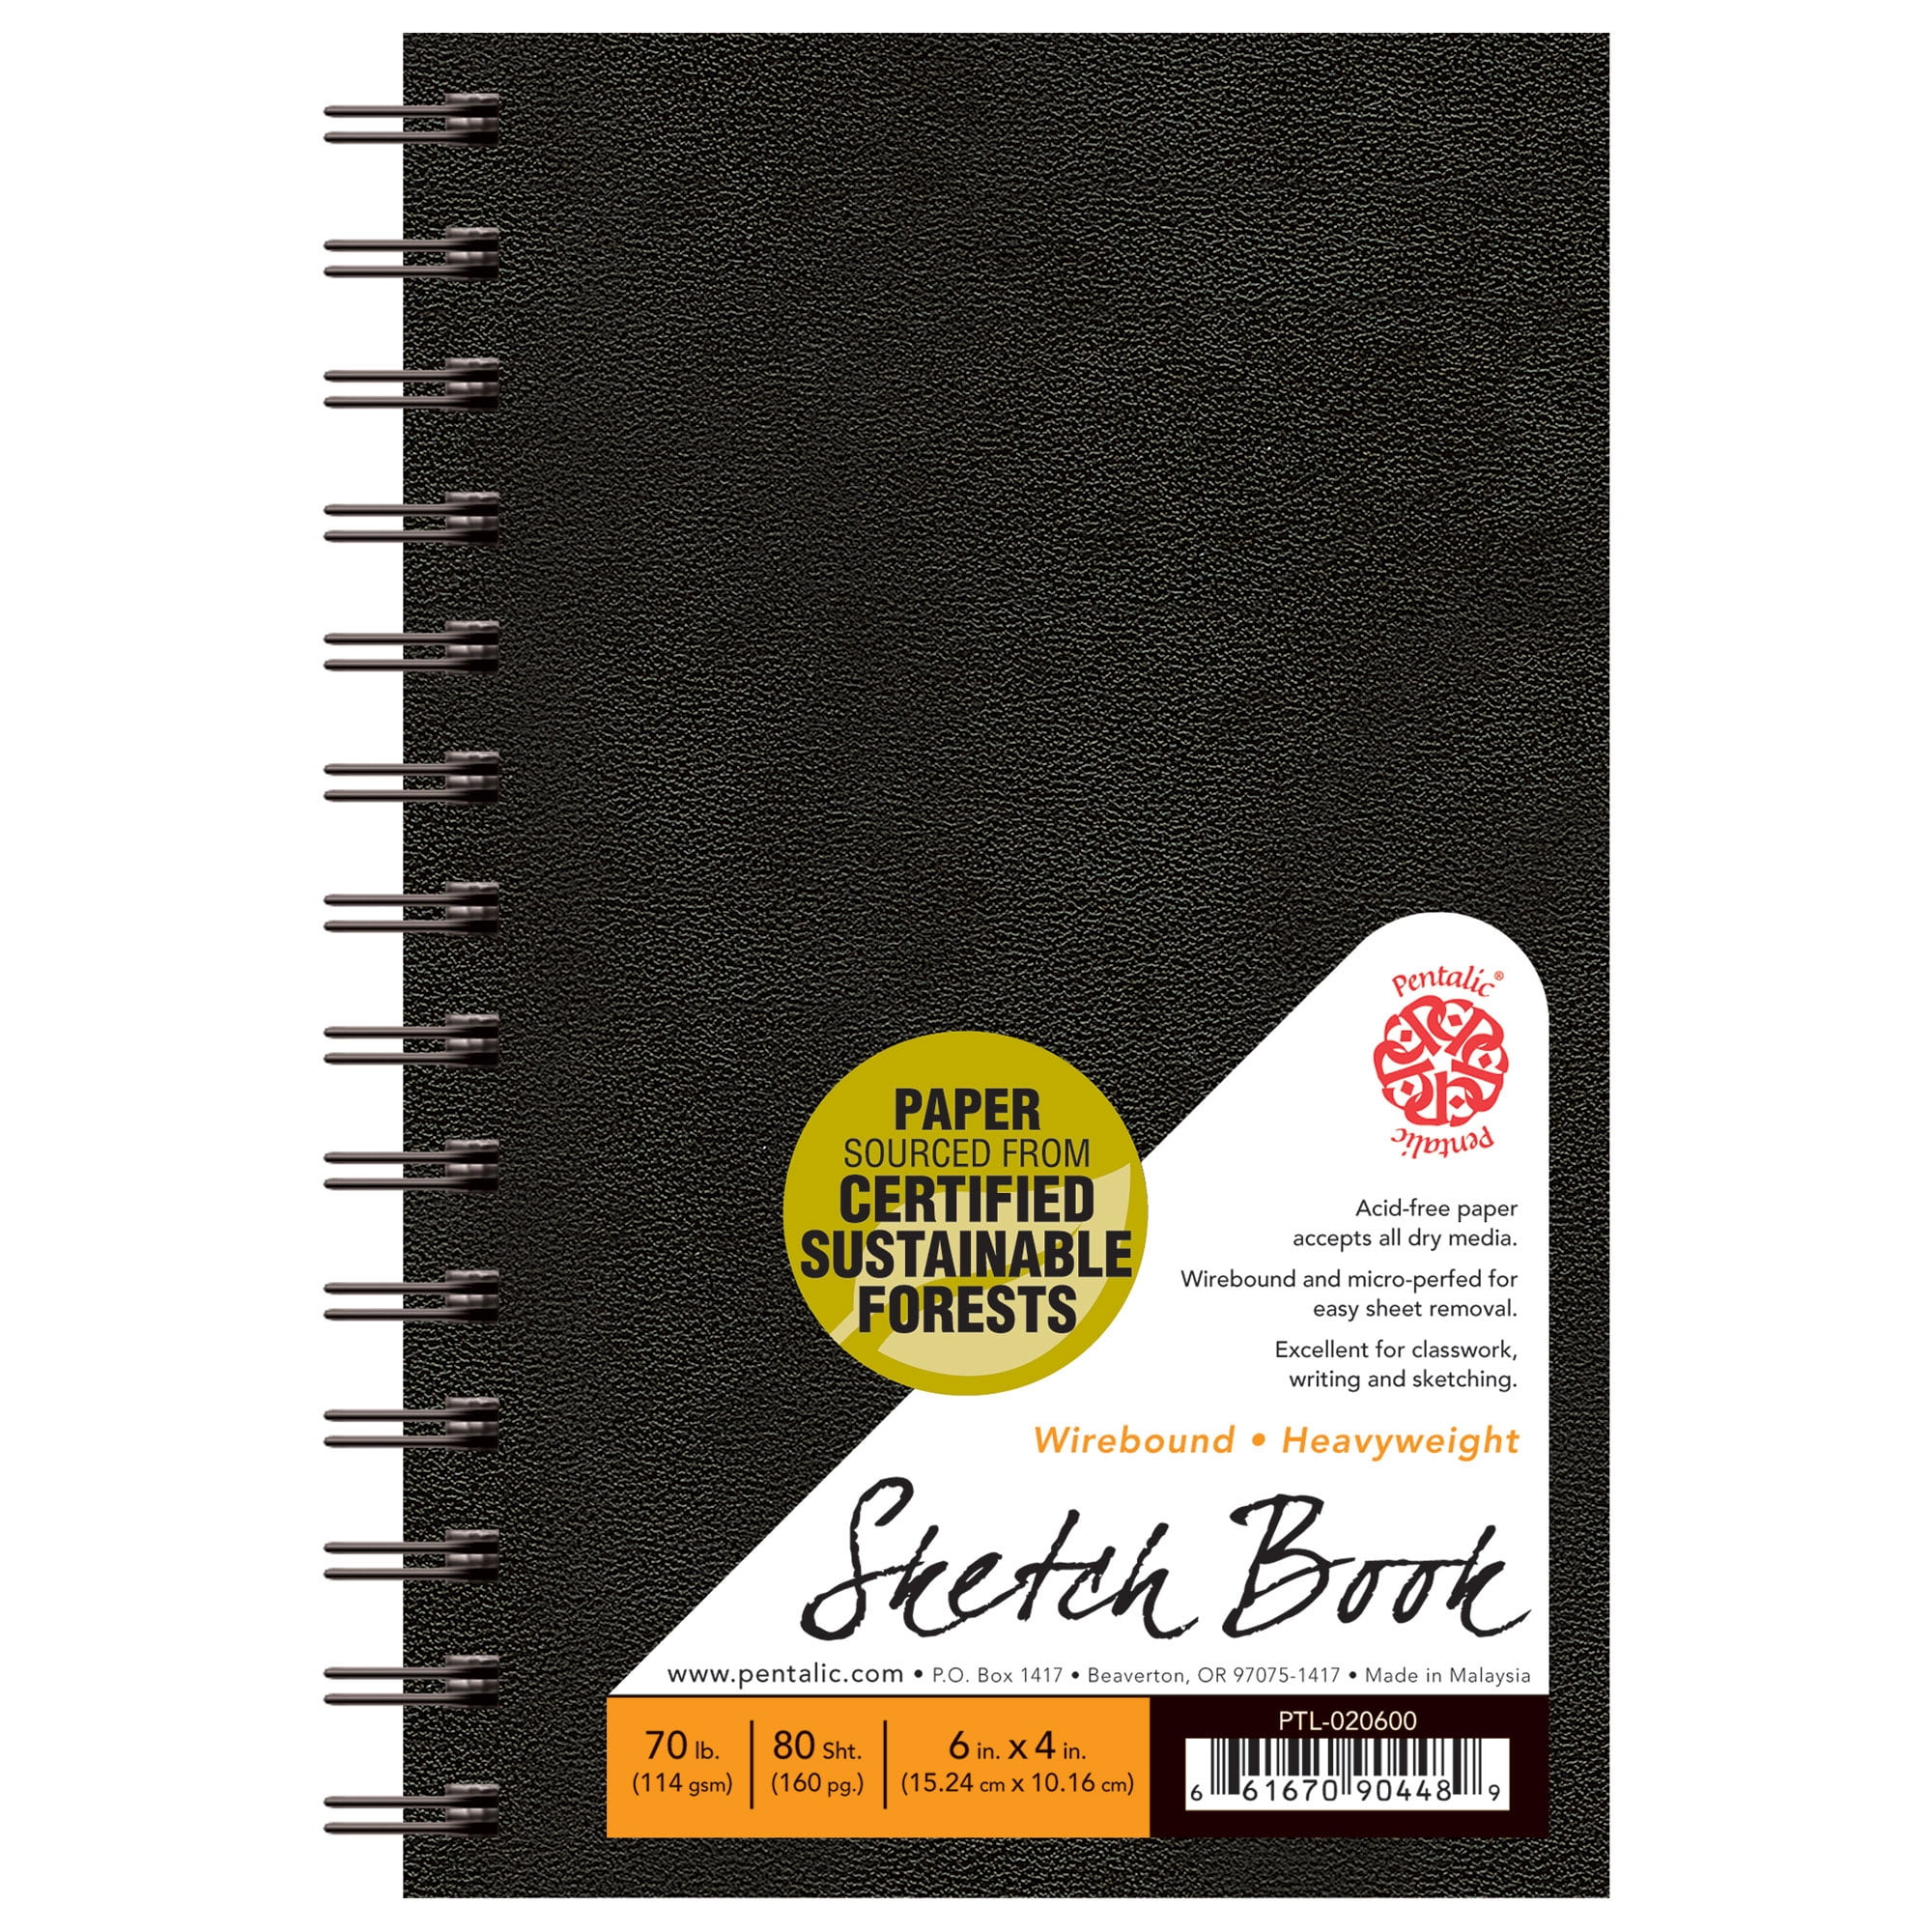 U.S. Art Supply 9 x 12 Mixed Media Paper Pad Sketchbook, 2 Pack, 60 Sheets, 98 lb (160 GSM) - Spiral-Bound, Perforated, Acid-Free - Artist